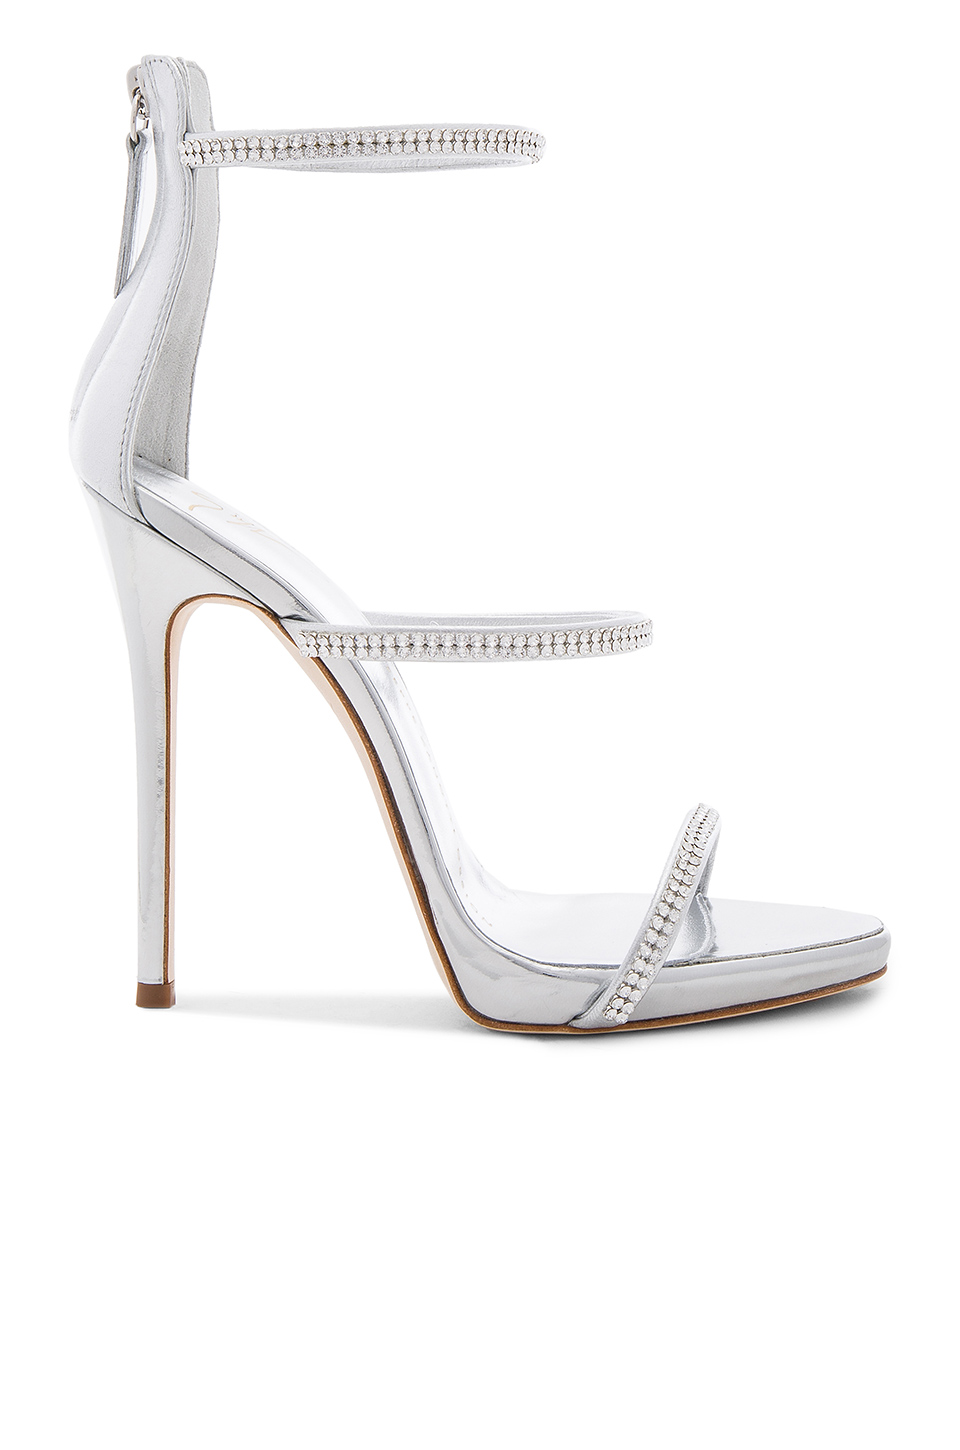 GIUSEPPE ZANOTTI - MIRRORED ROSE GOLD SANDAL WITH CRYSTALS HARMONY ...